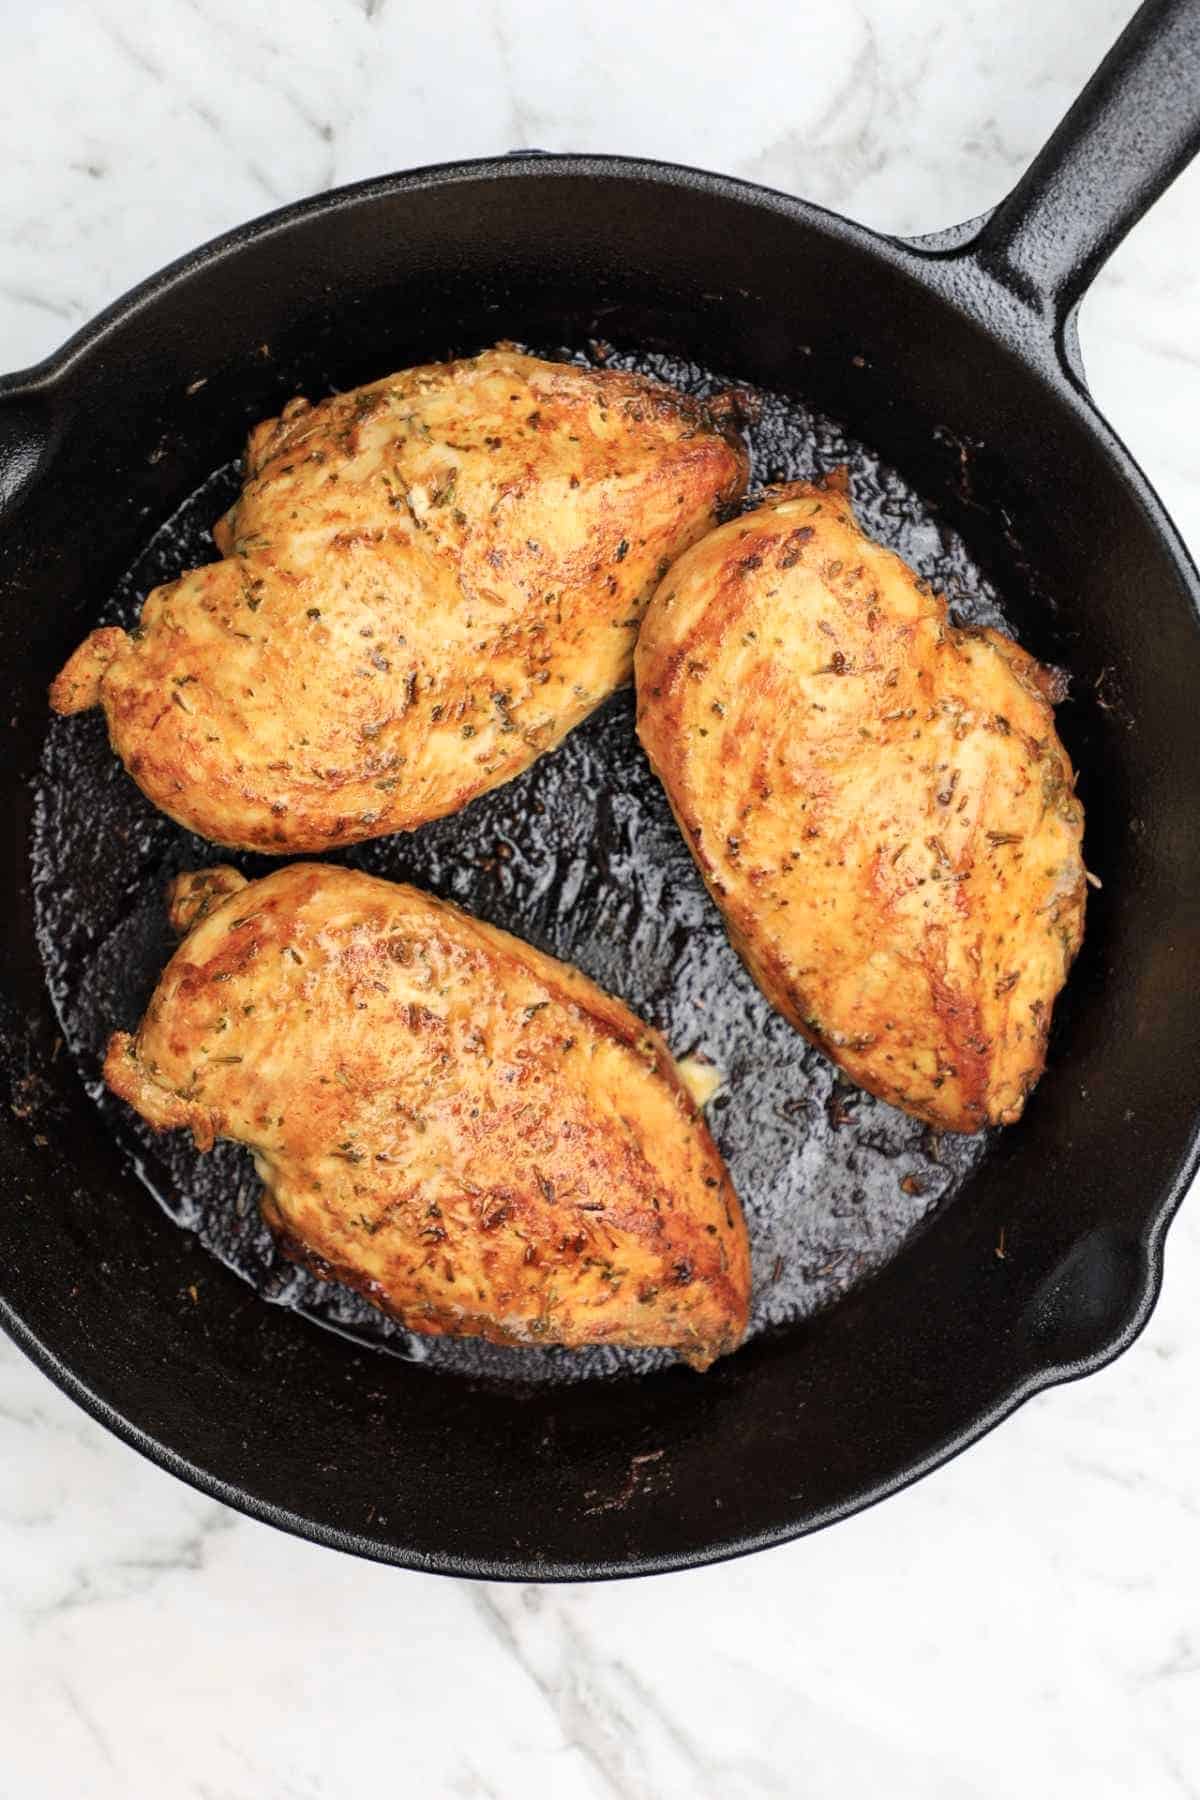 pan fried chicken breasts in a skillet.